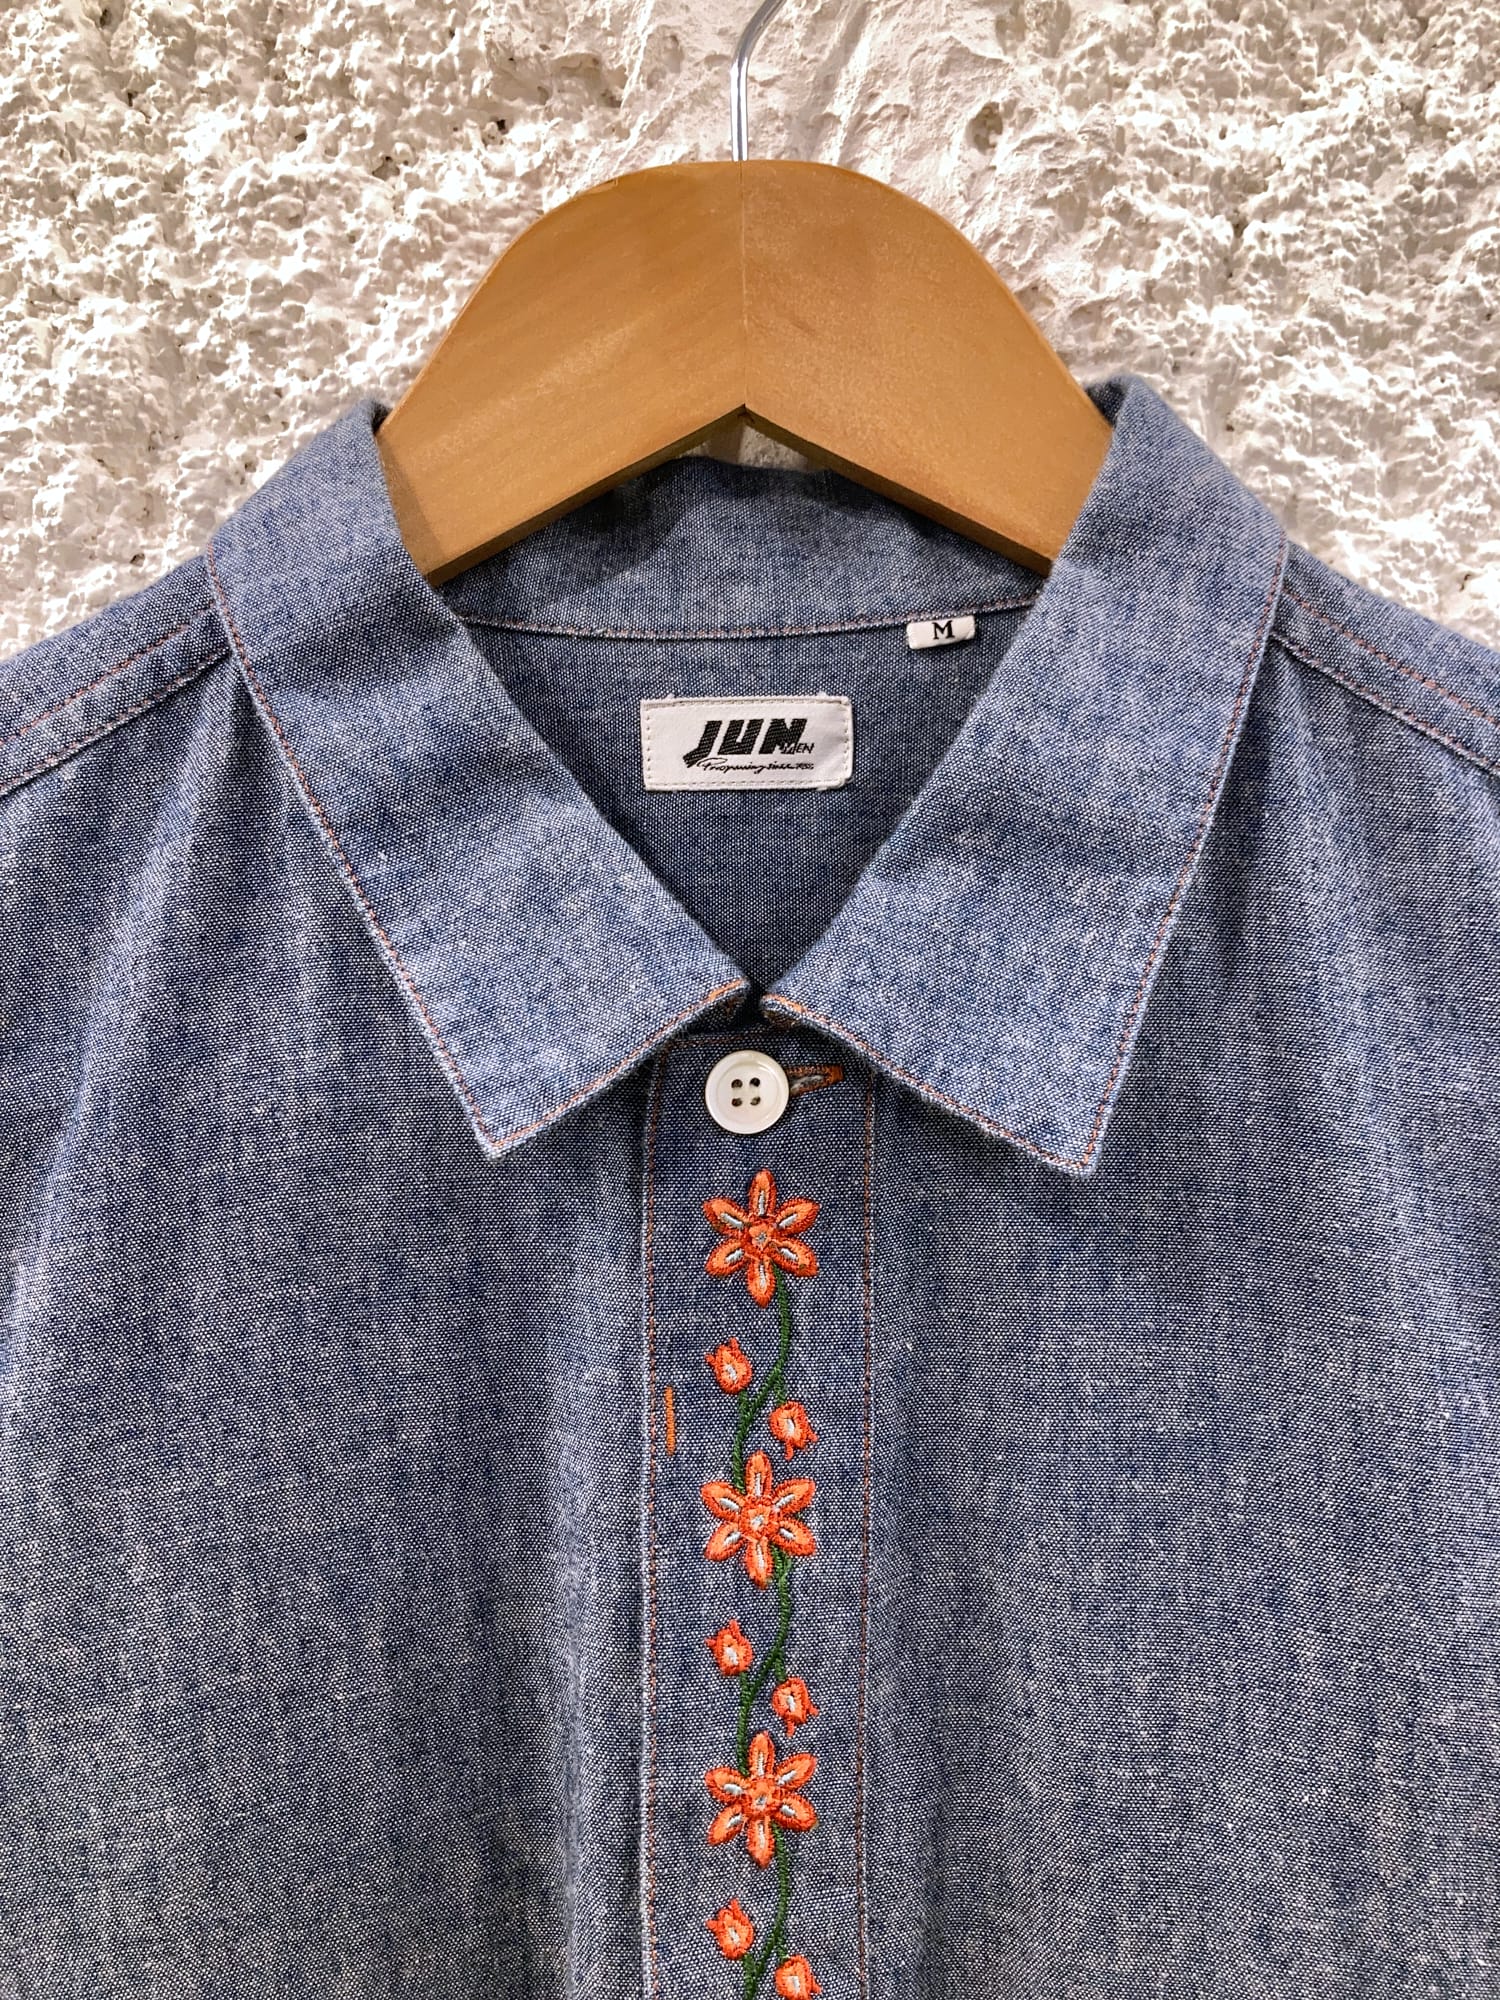 Jun Men 1990s blue chambray shirt with floral embroidered placket - M